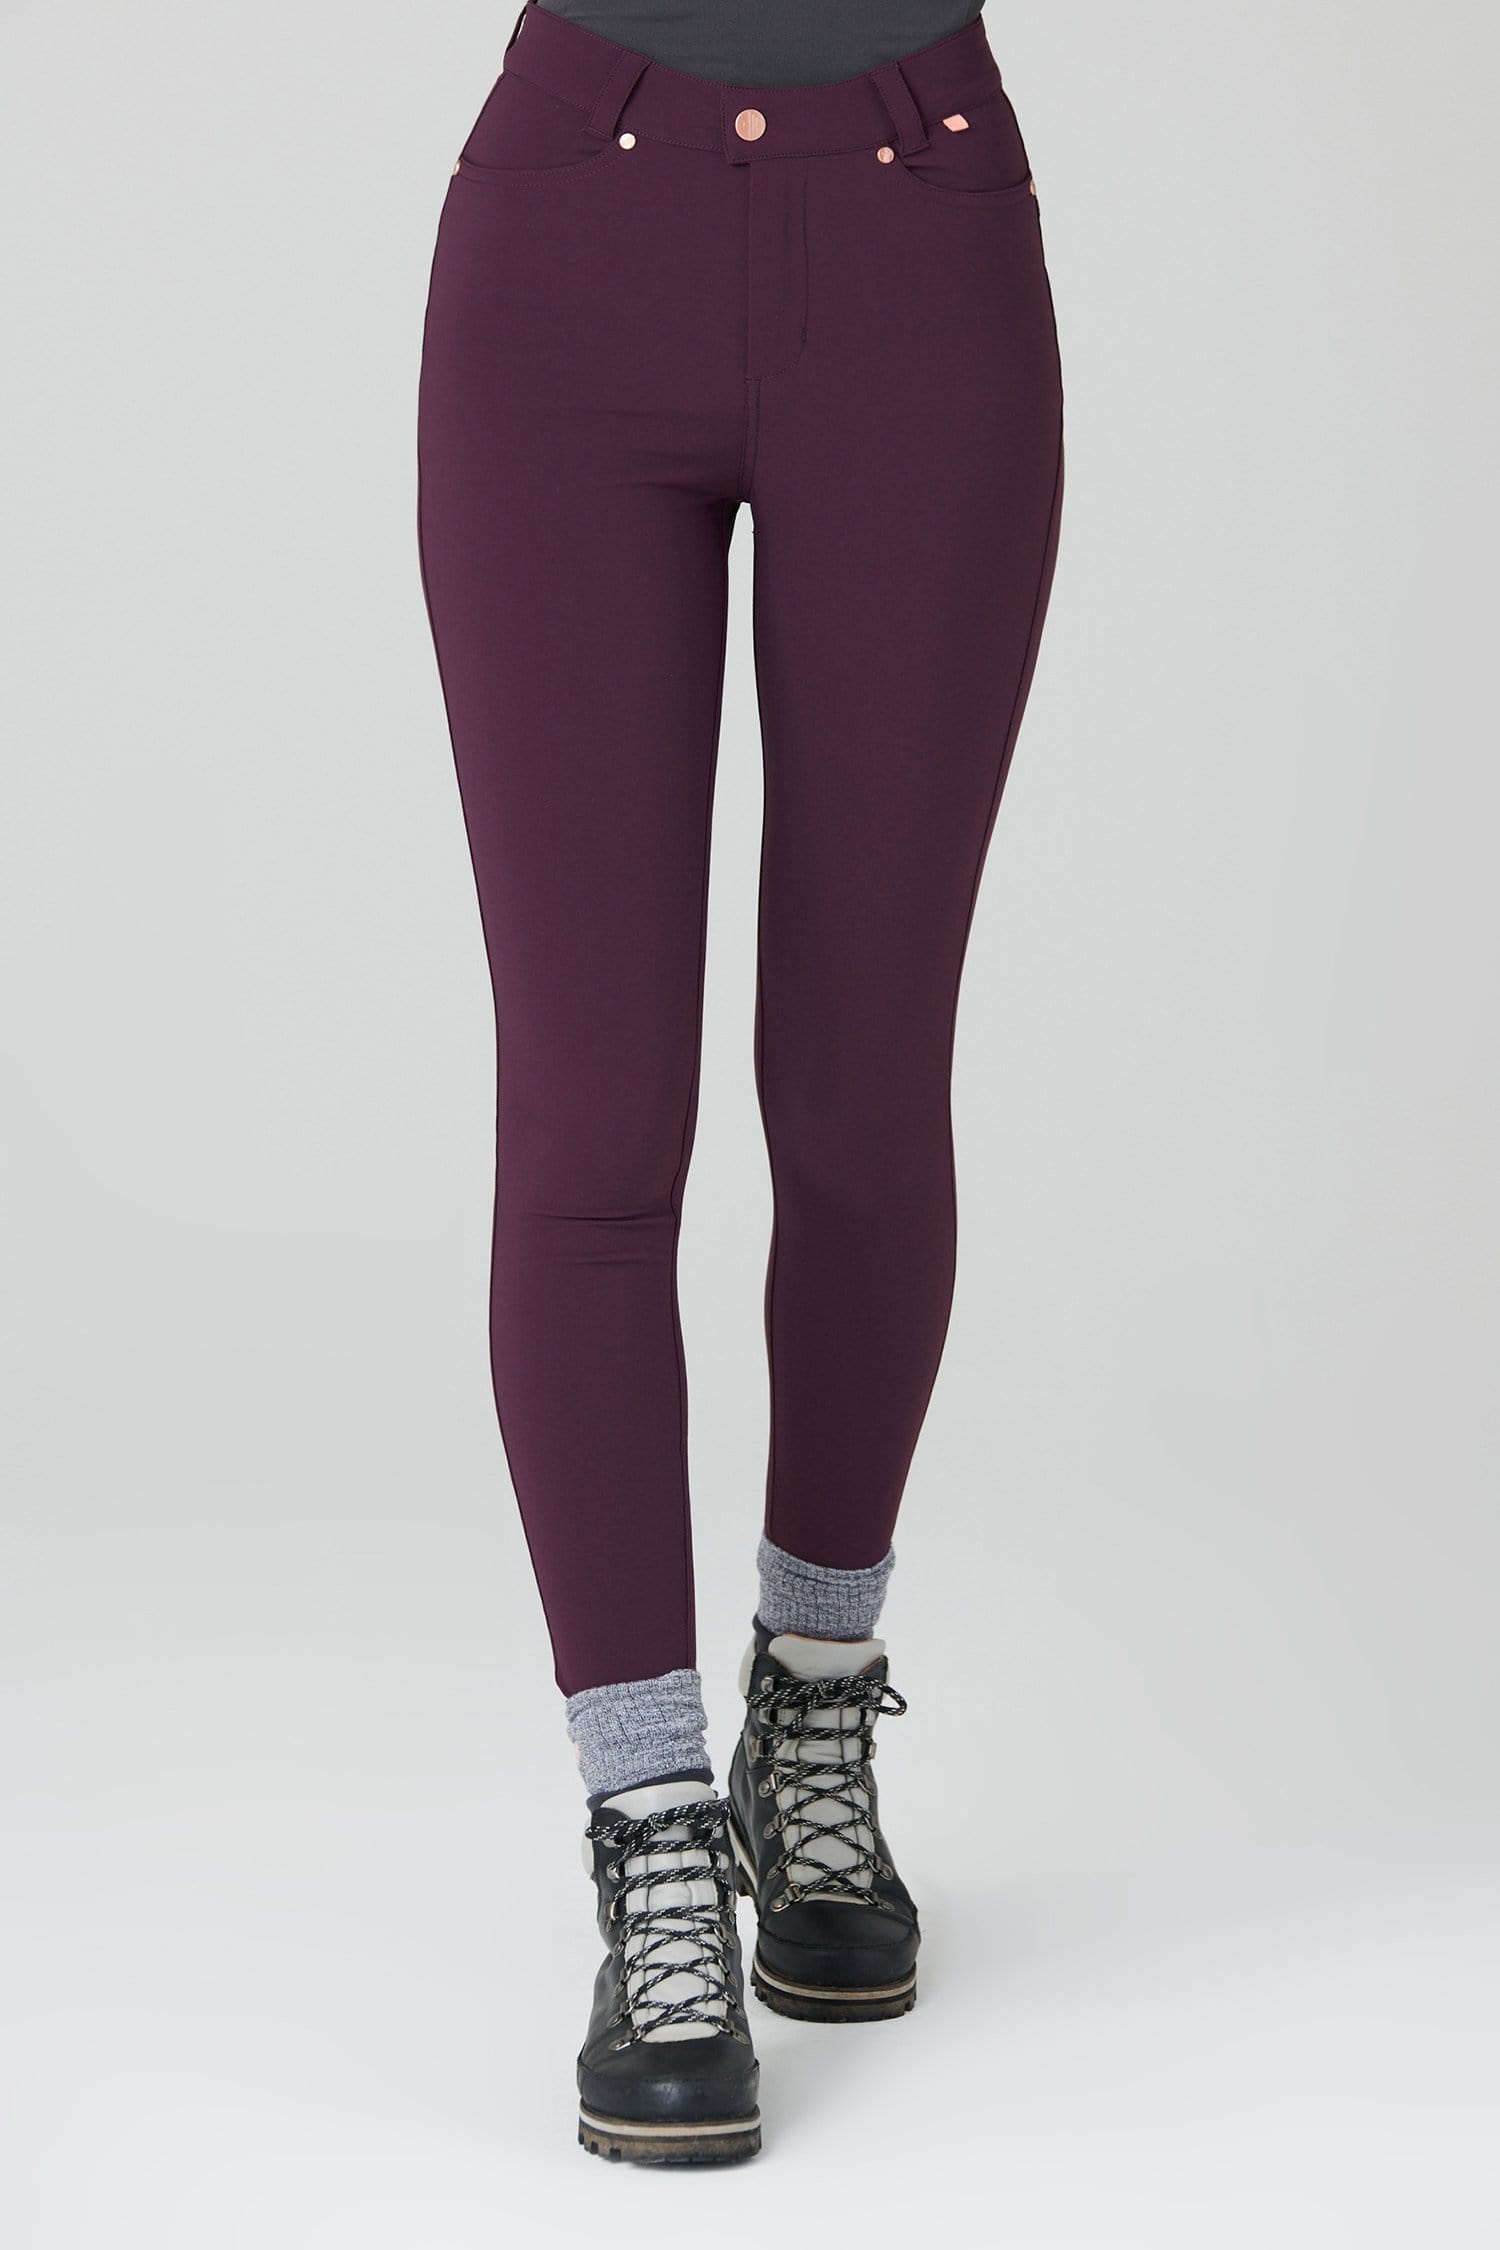 Max Stretch Skinny Outdoor Trousers - Aubergine - 28r / Uk10 - Womens - Acai Outdoorwear